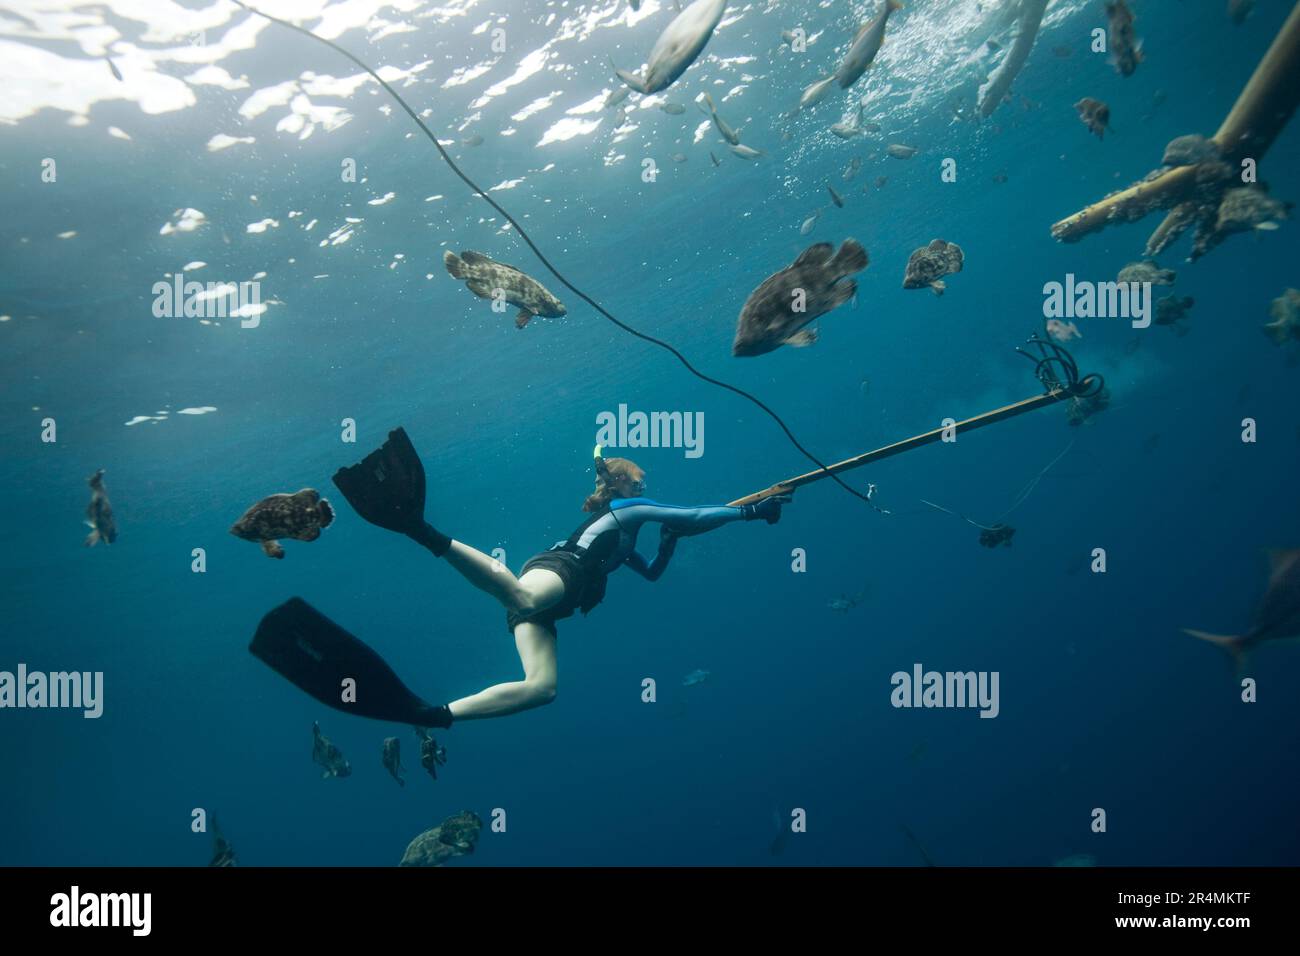 A female diver in flippers shoots a speargun underwater, while surrounded  by large fish in Costa Rica Stock Photo - Alamy